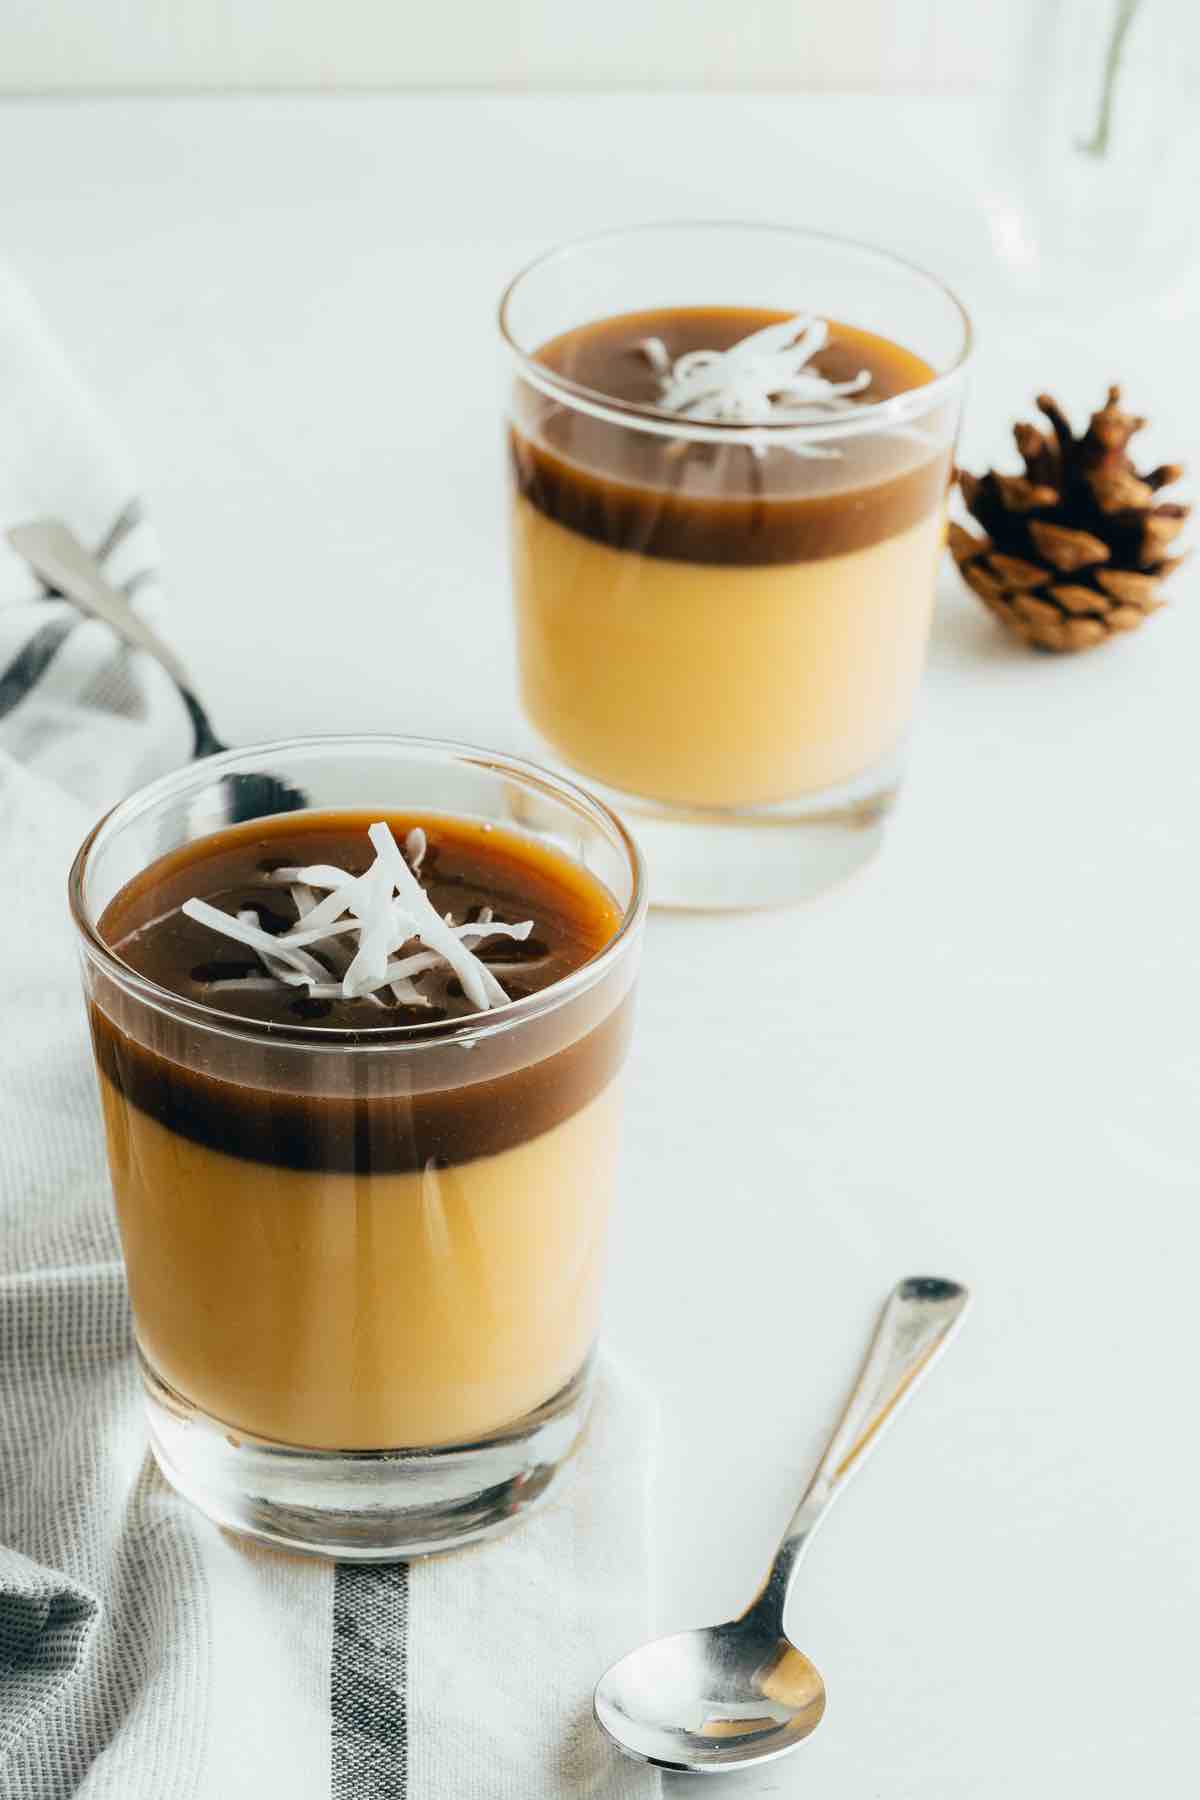 This pumpkin panna cotta is the perfect dessert for special occasions in the fall like baby showers, weddings and so much more.